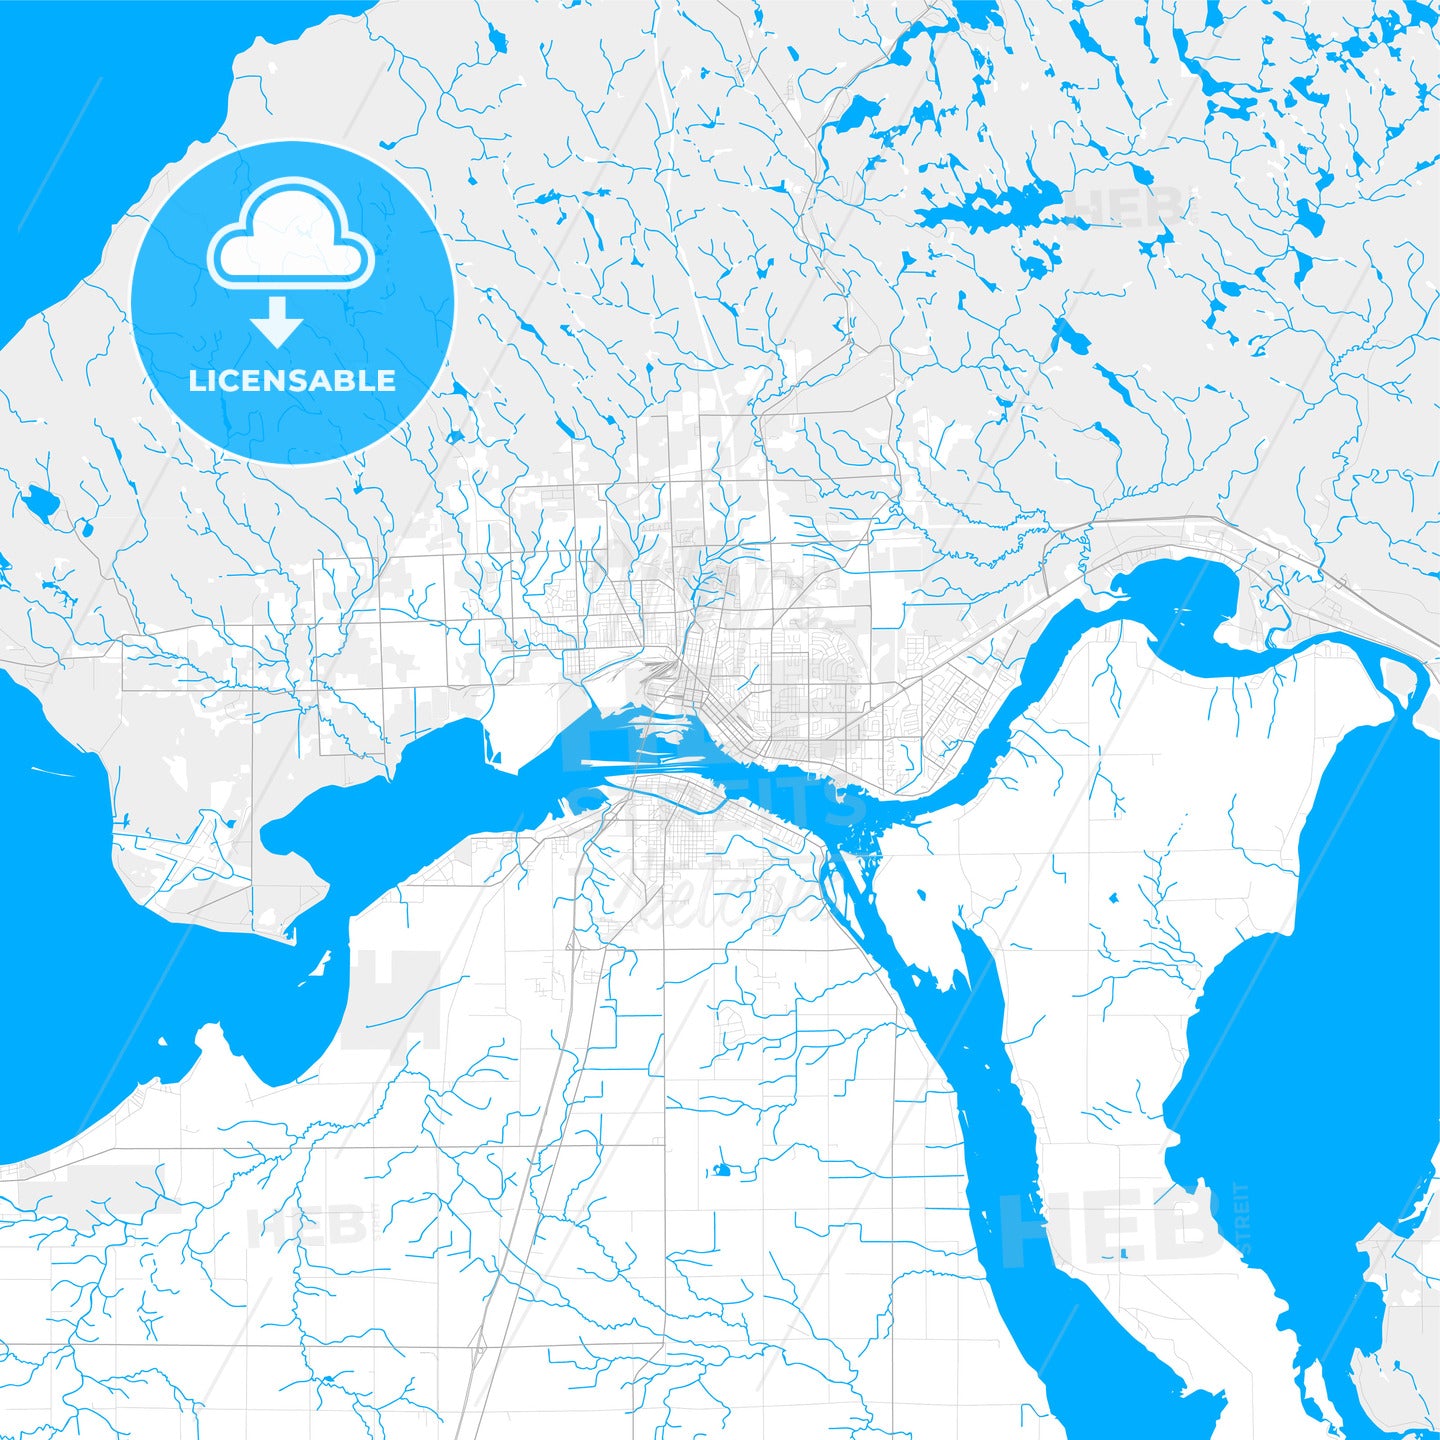 Rich detailed vector map of Sault Ste. Marie, Ontario, Canada